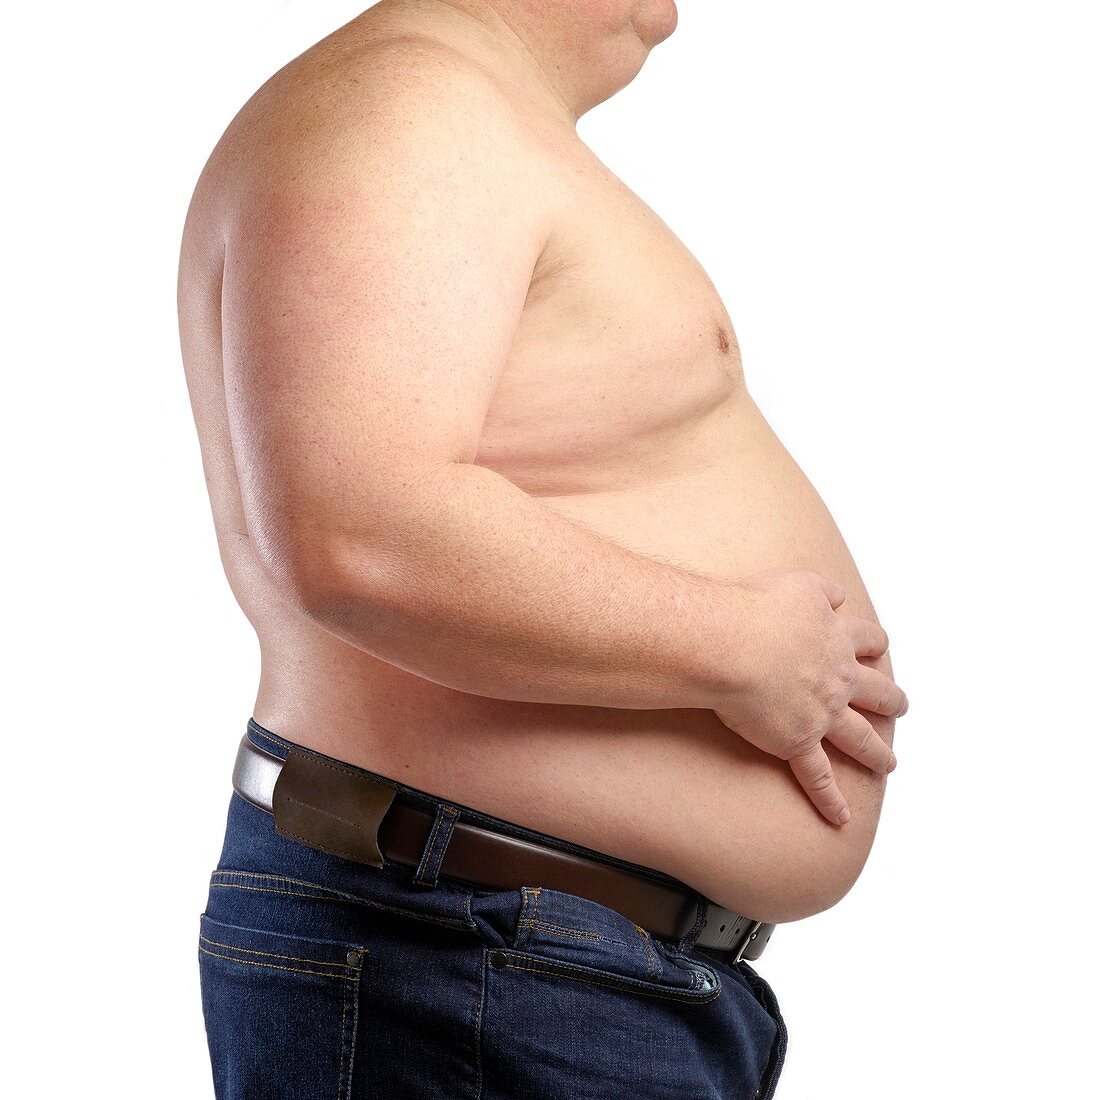 Overweight man touching stomach